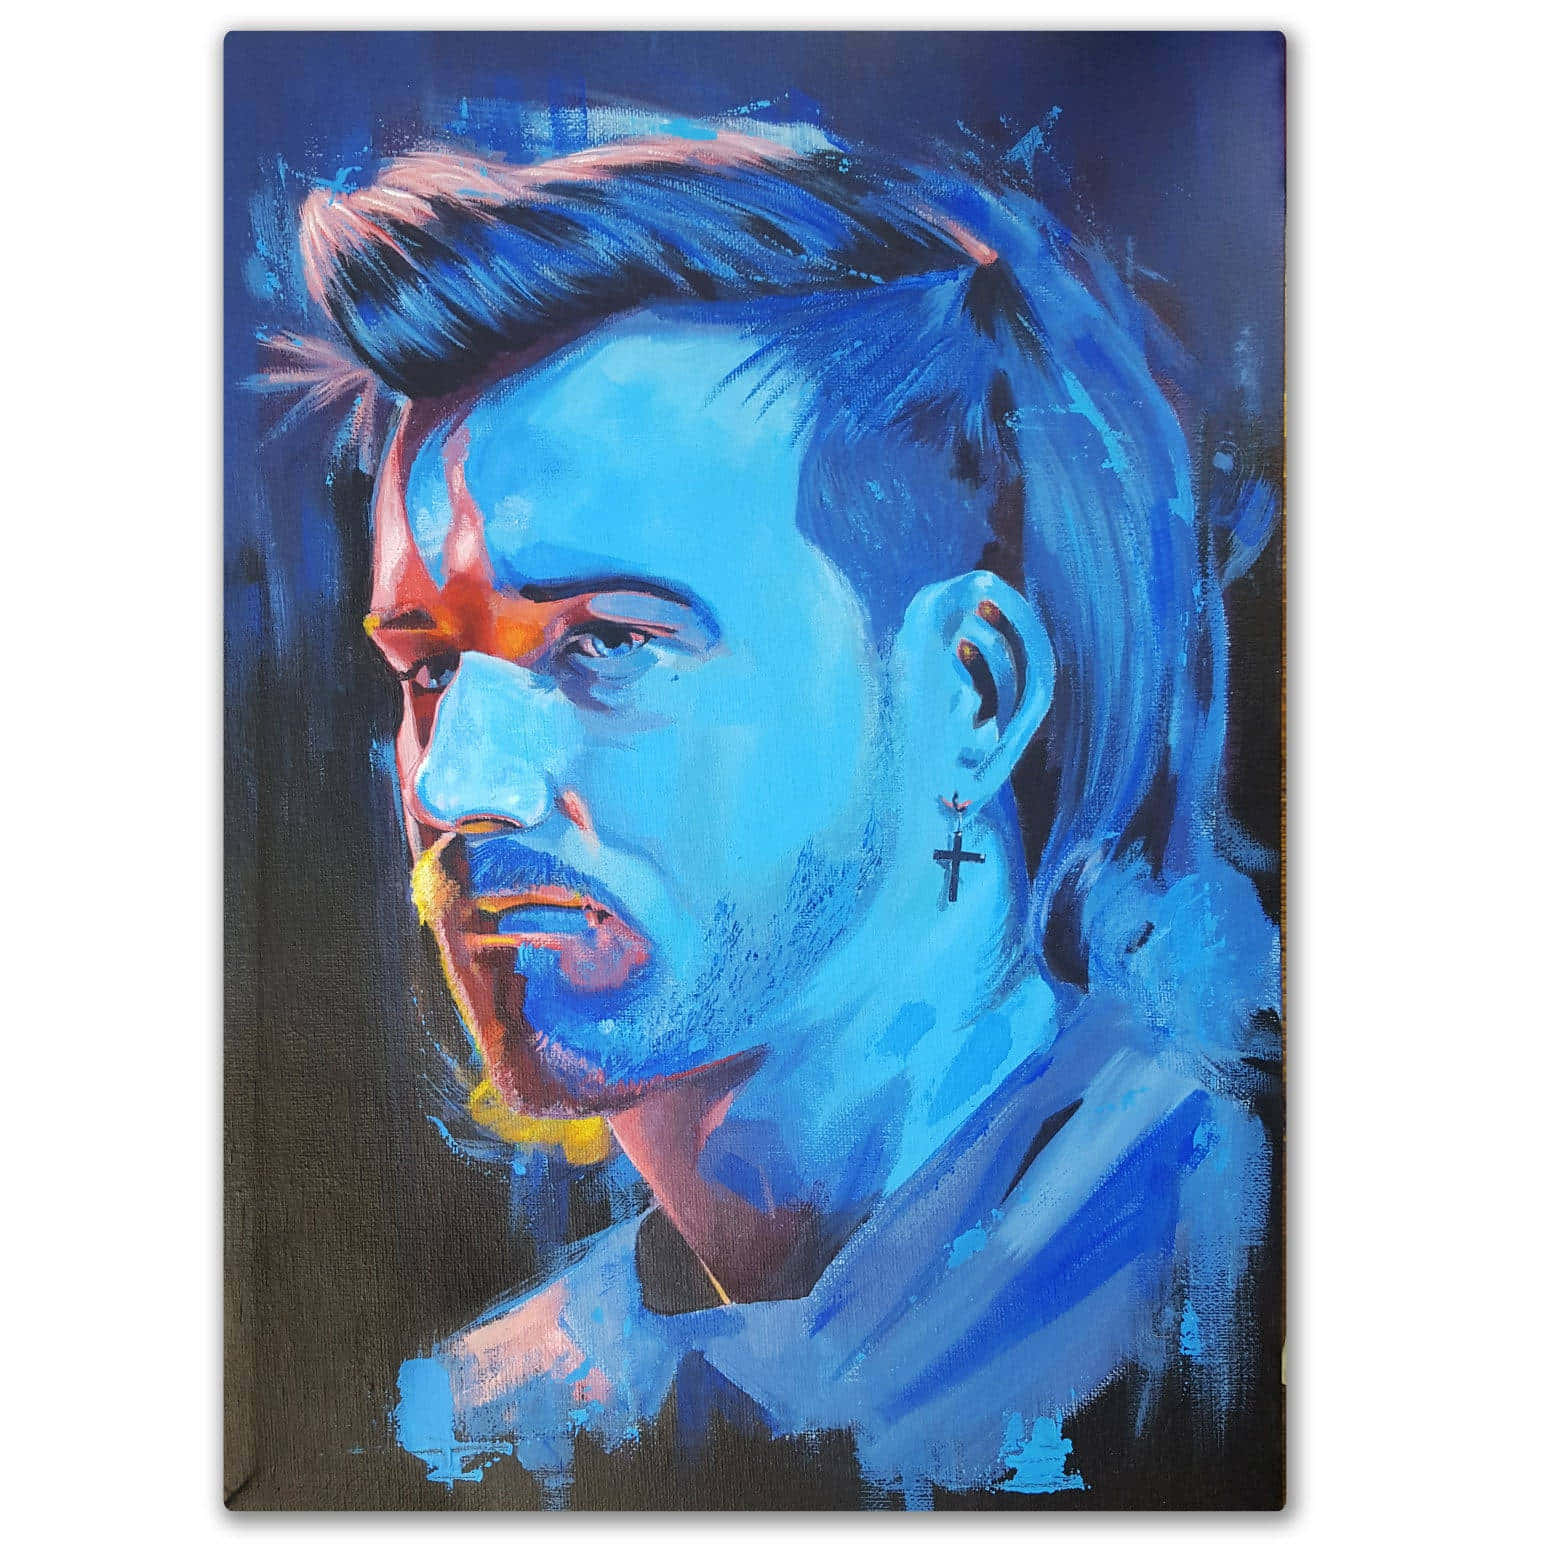 A Painting Of A Man With Blue Hair